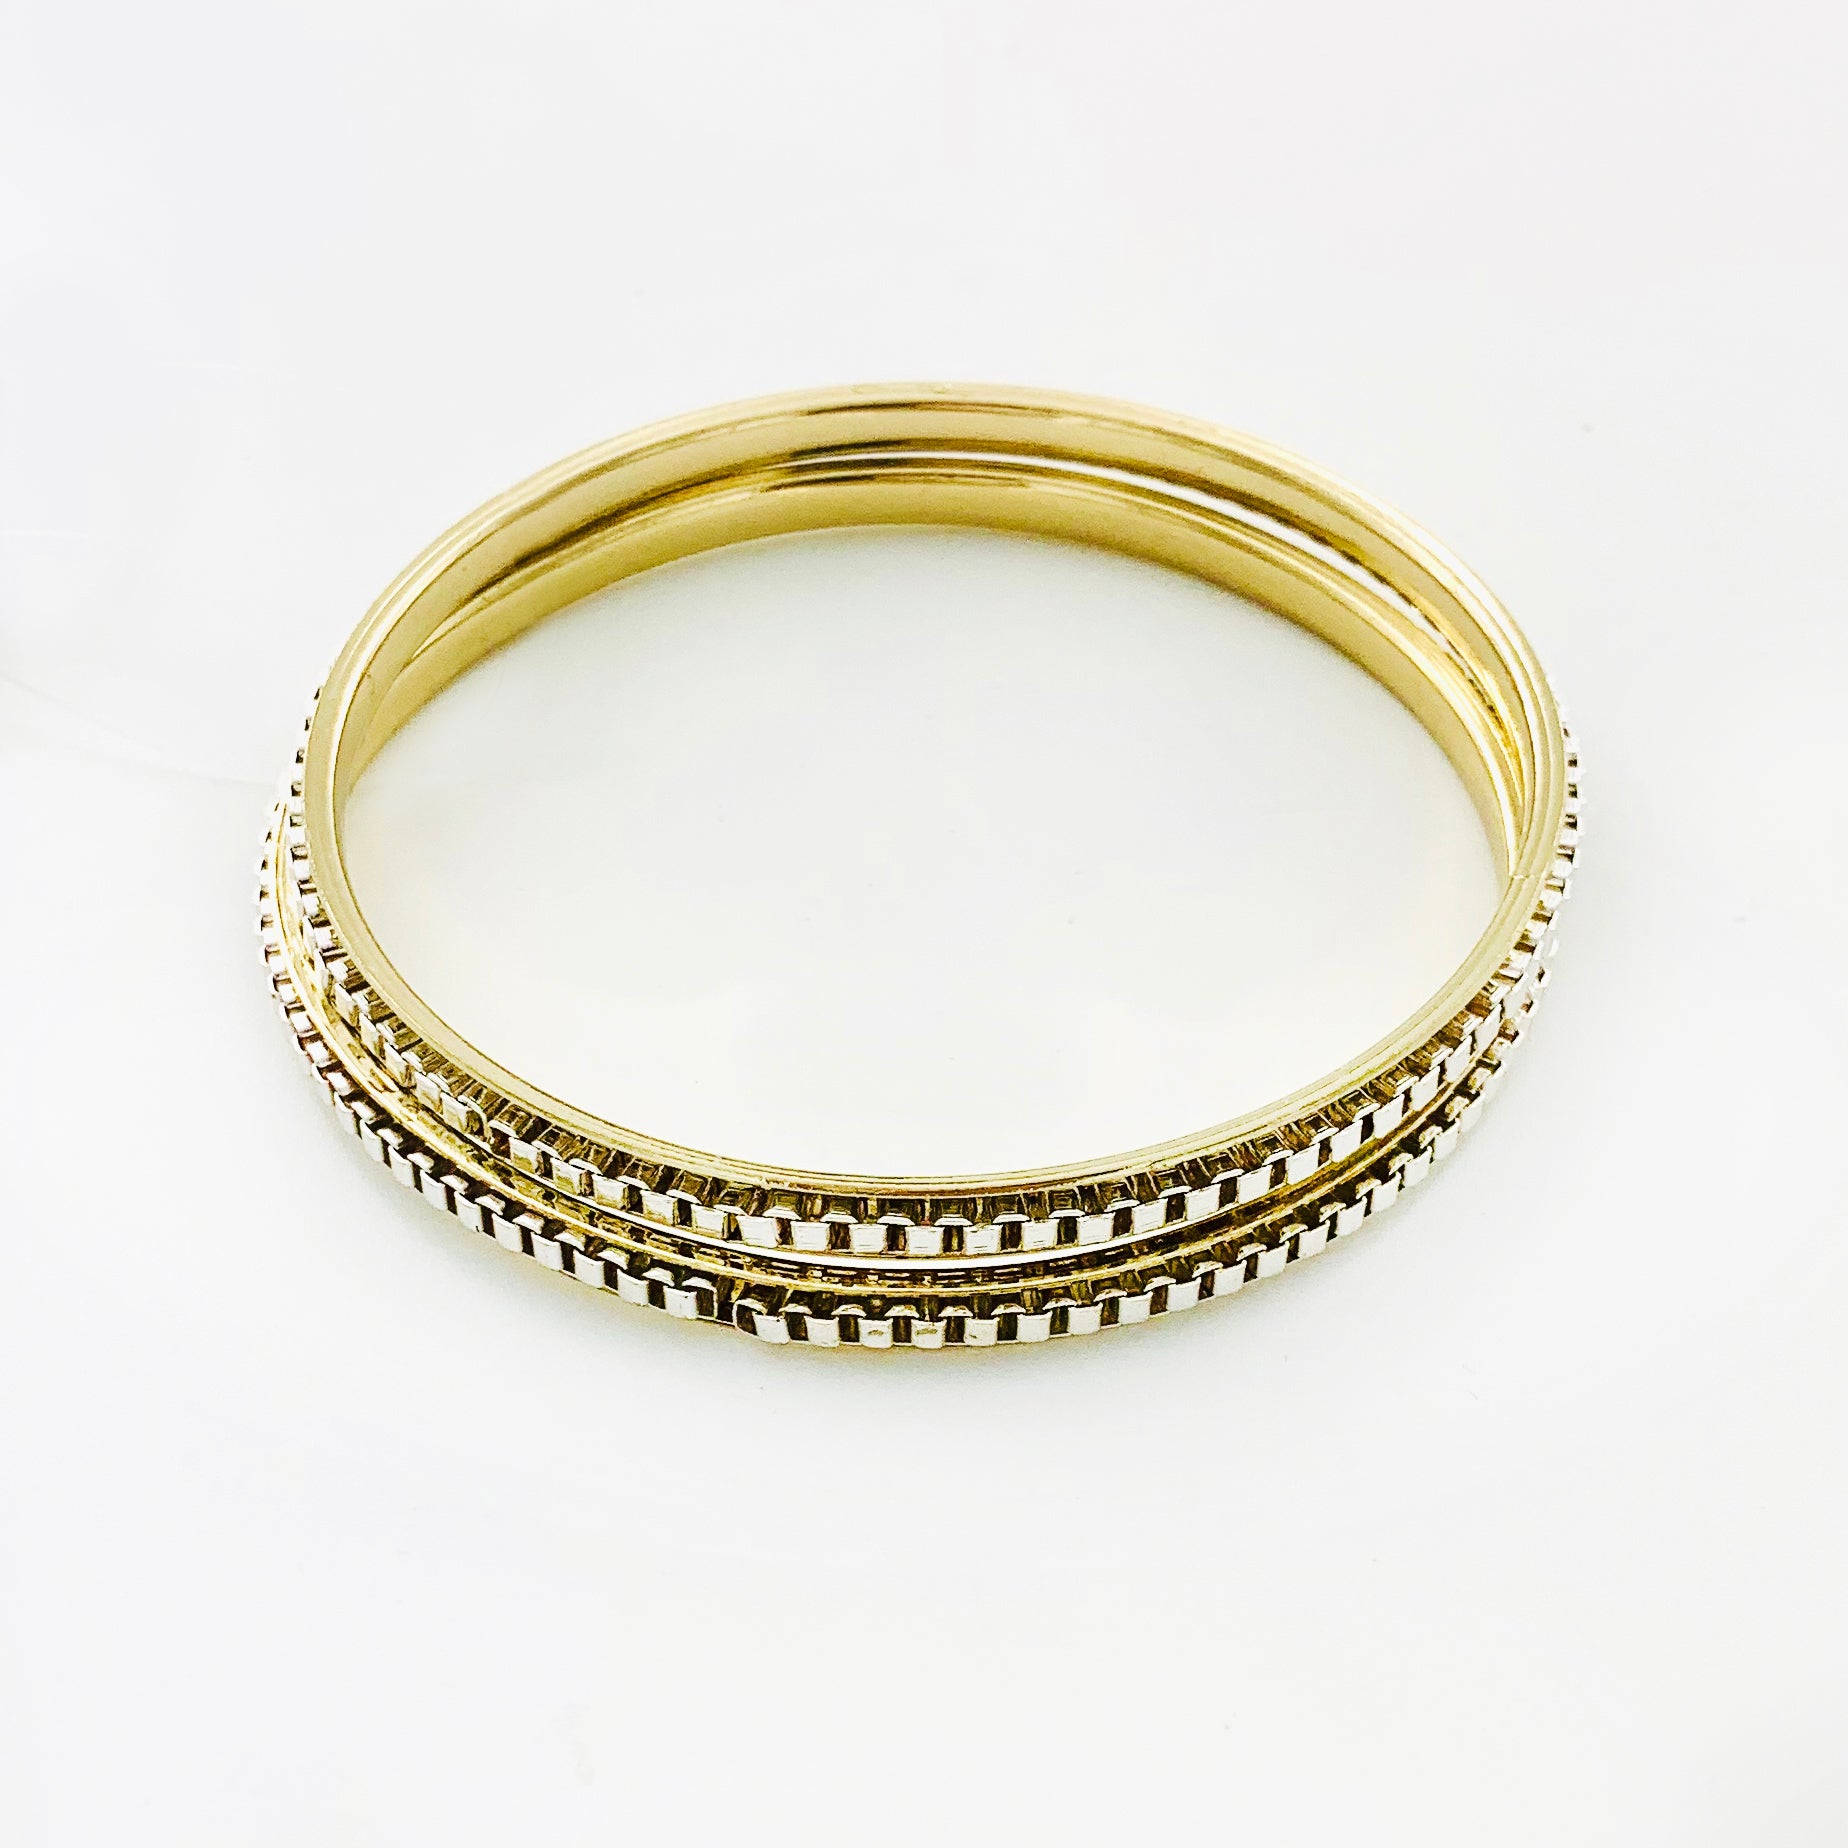 Gold Bangles with silver linked patterns